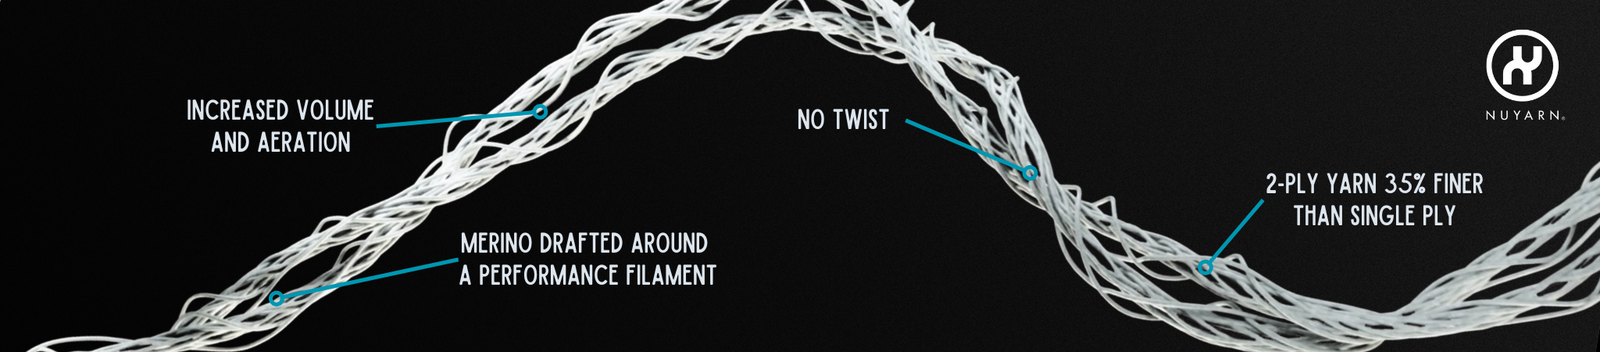 A microscopic level view of Nuyarn Merion Wool fibers with text to highlight the benefits; increased volume, no twist, drafted around a performance filament, and two ply yarn 35 percent finer then traditional single ply.